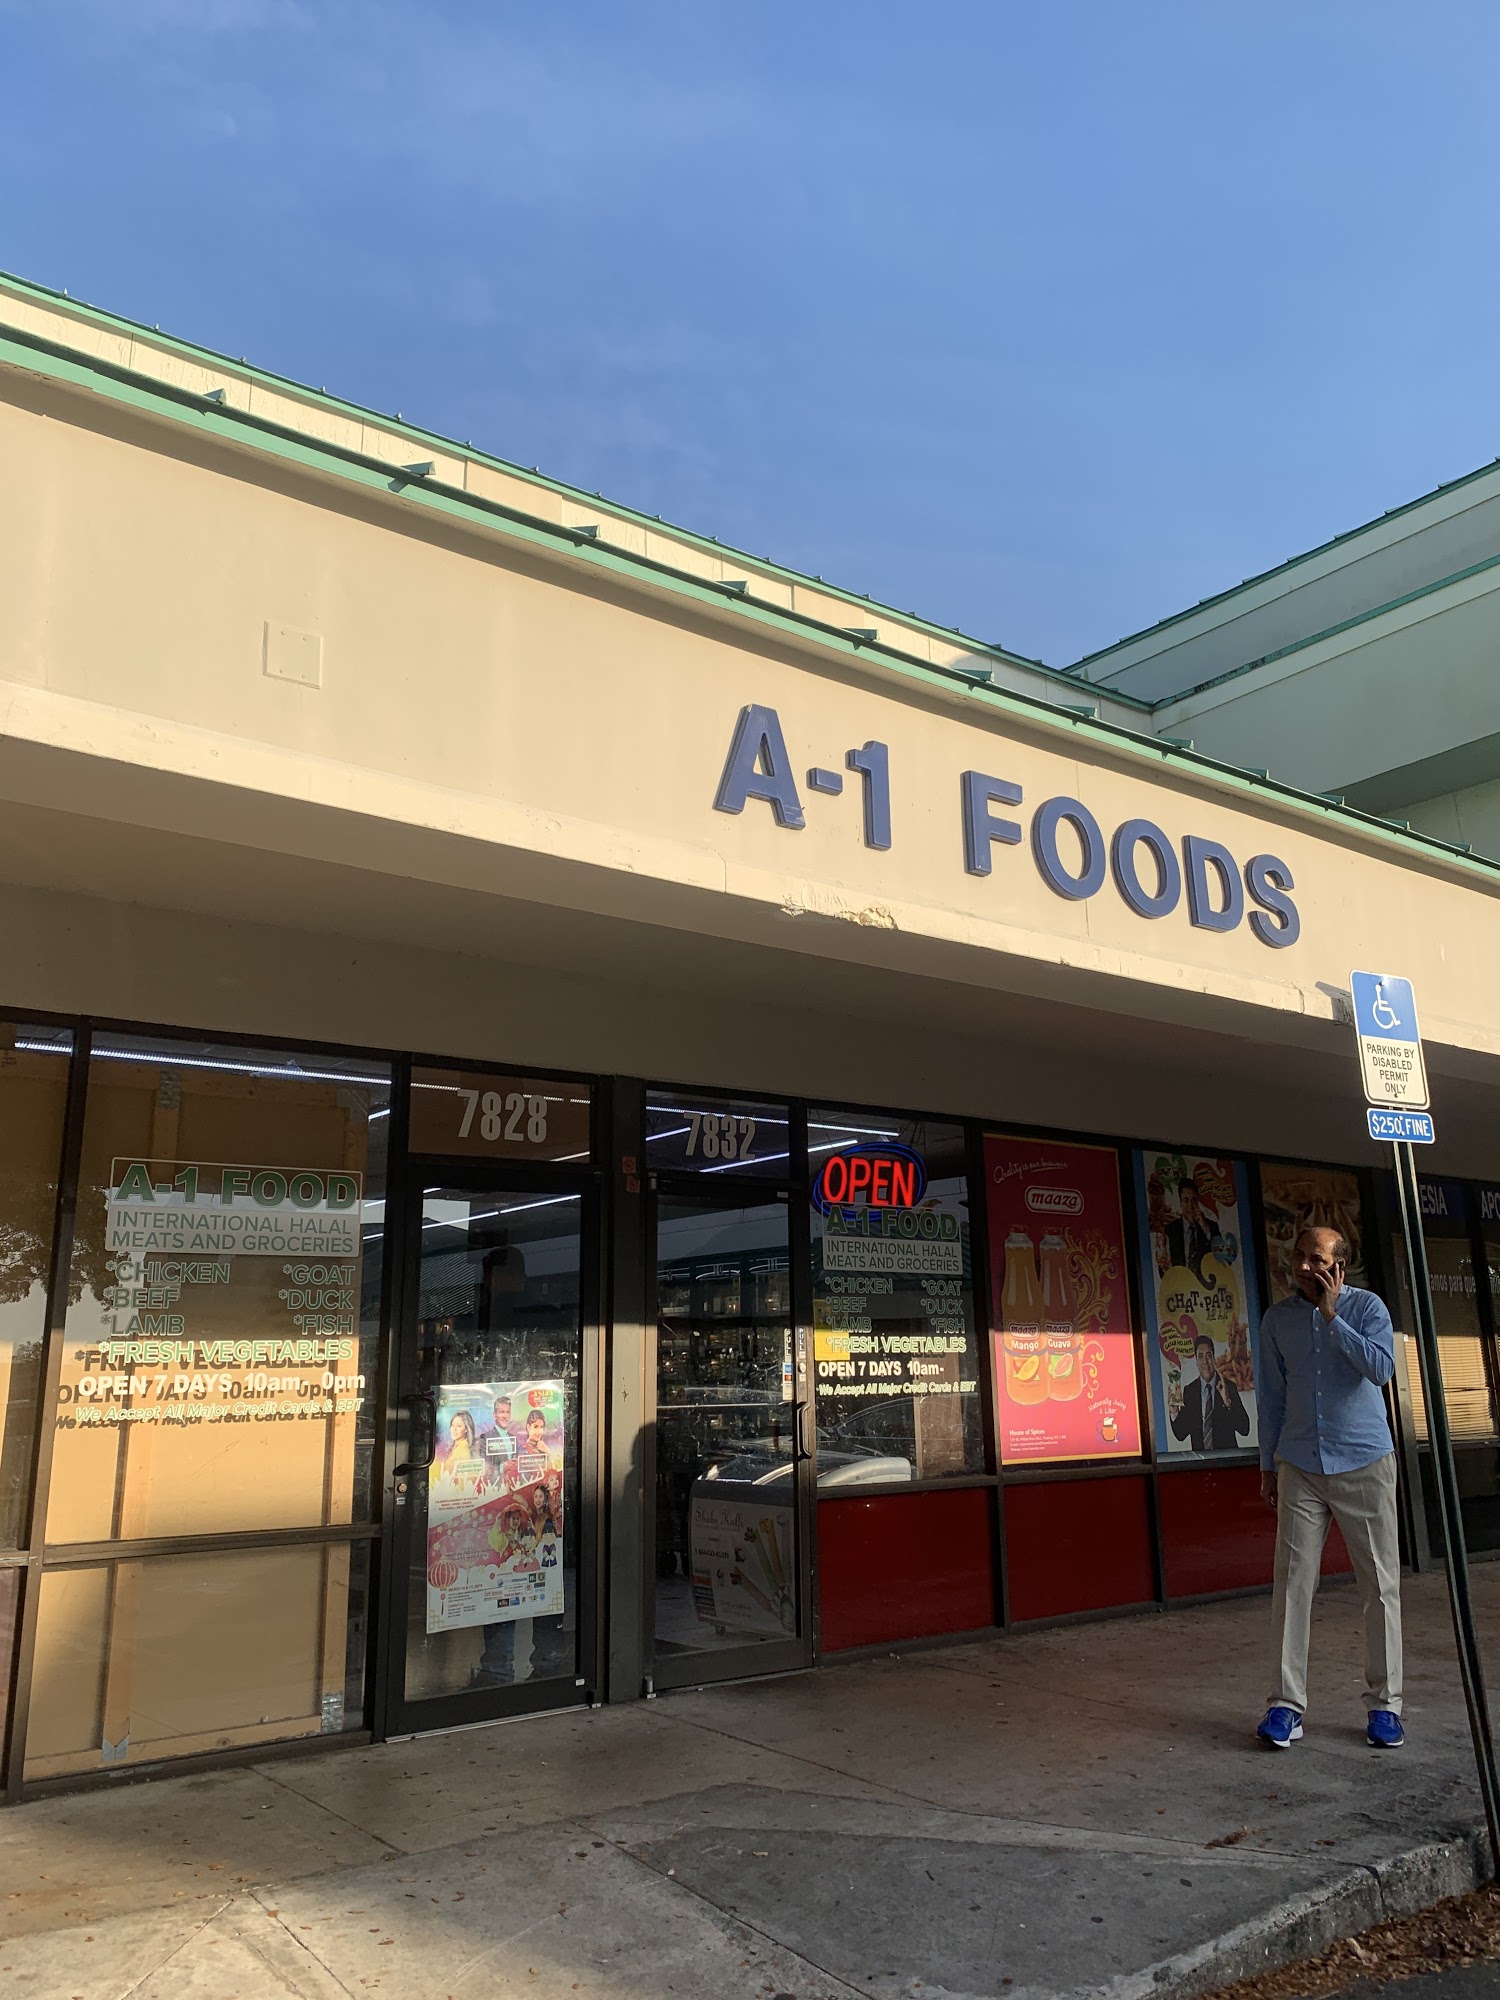 A-1 Foods